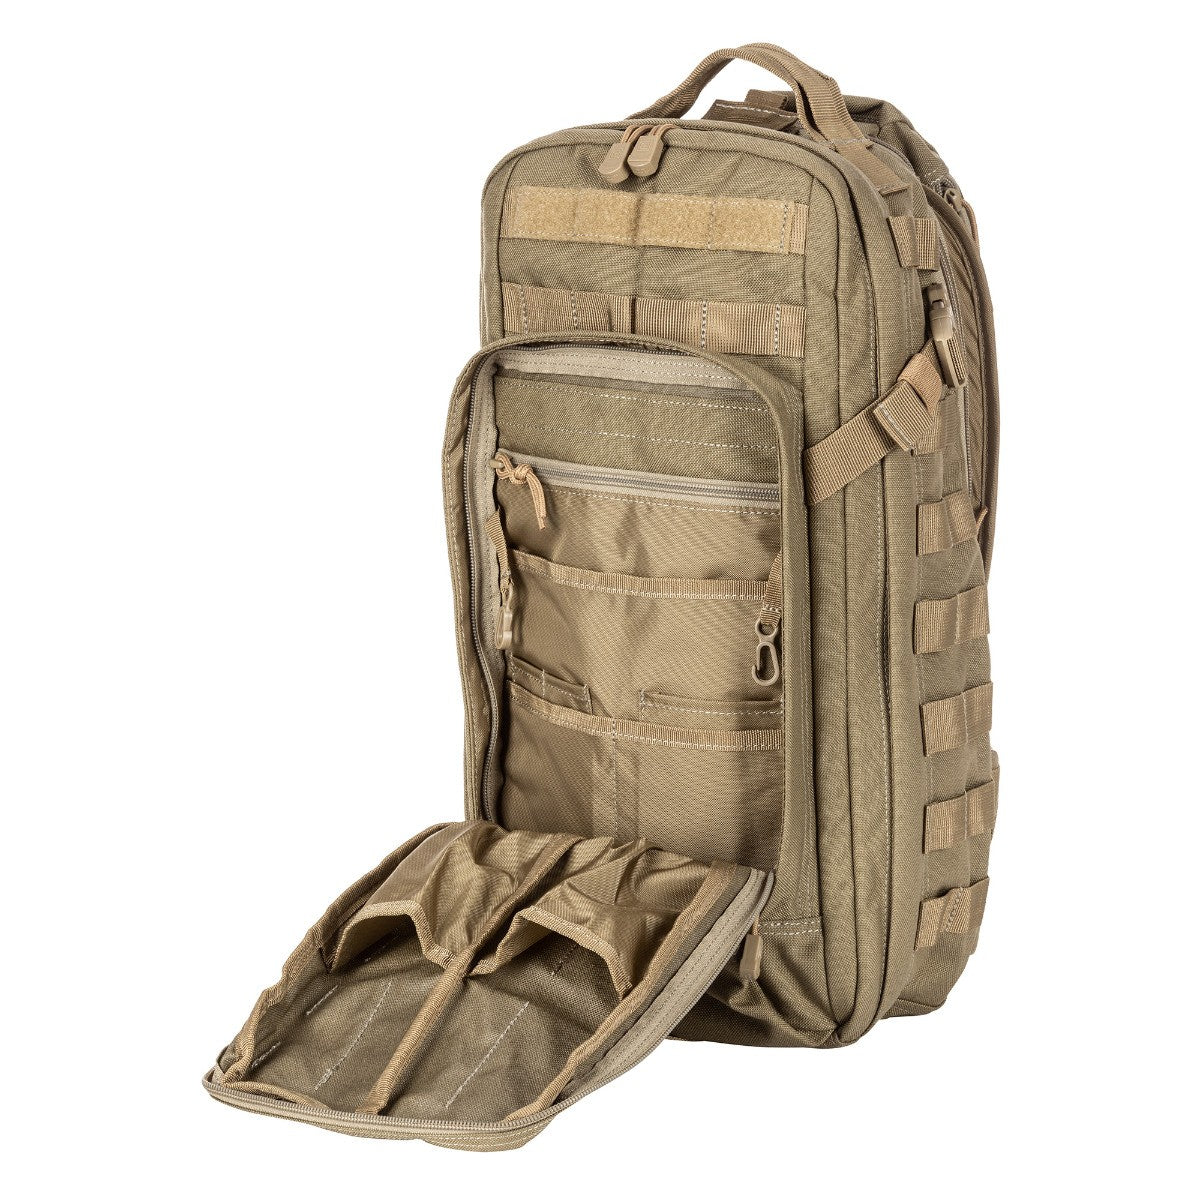 a large backpack with a zippered compartment